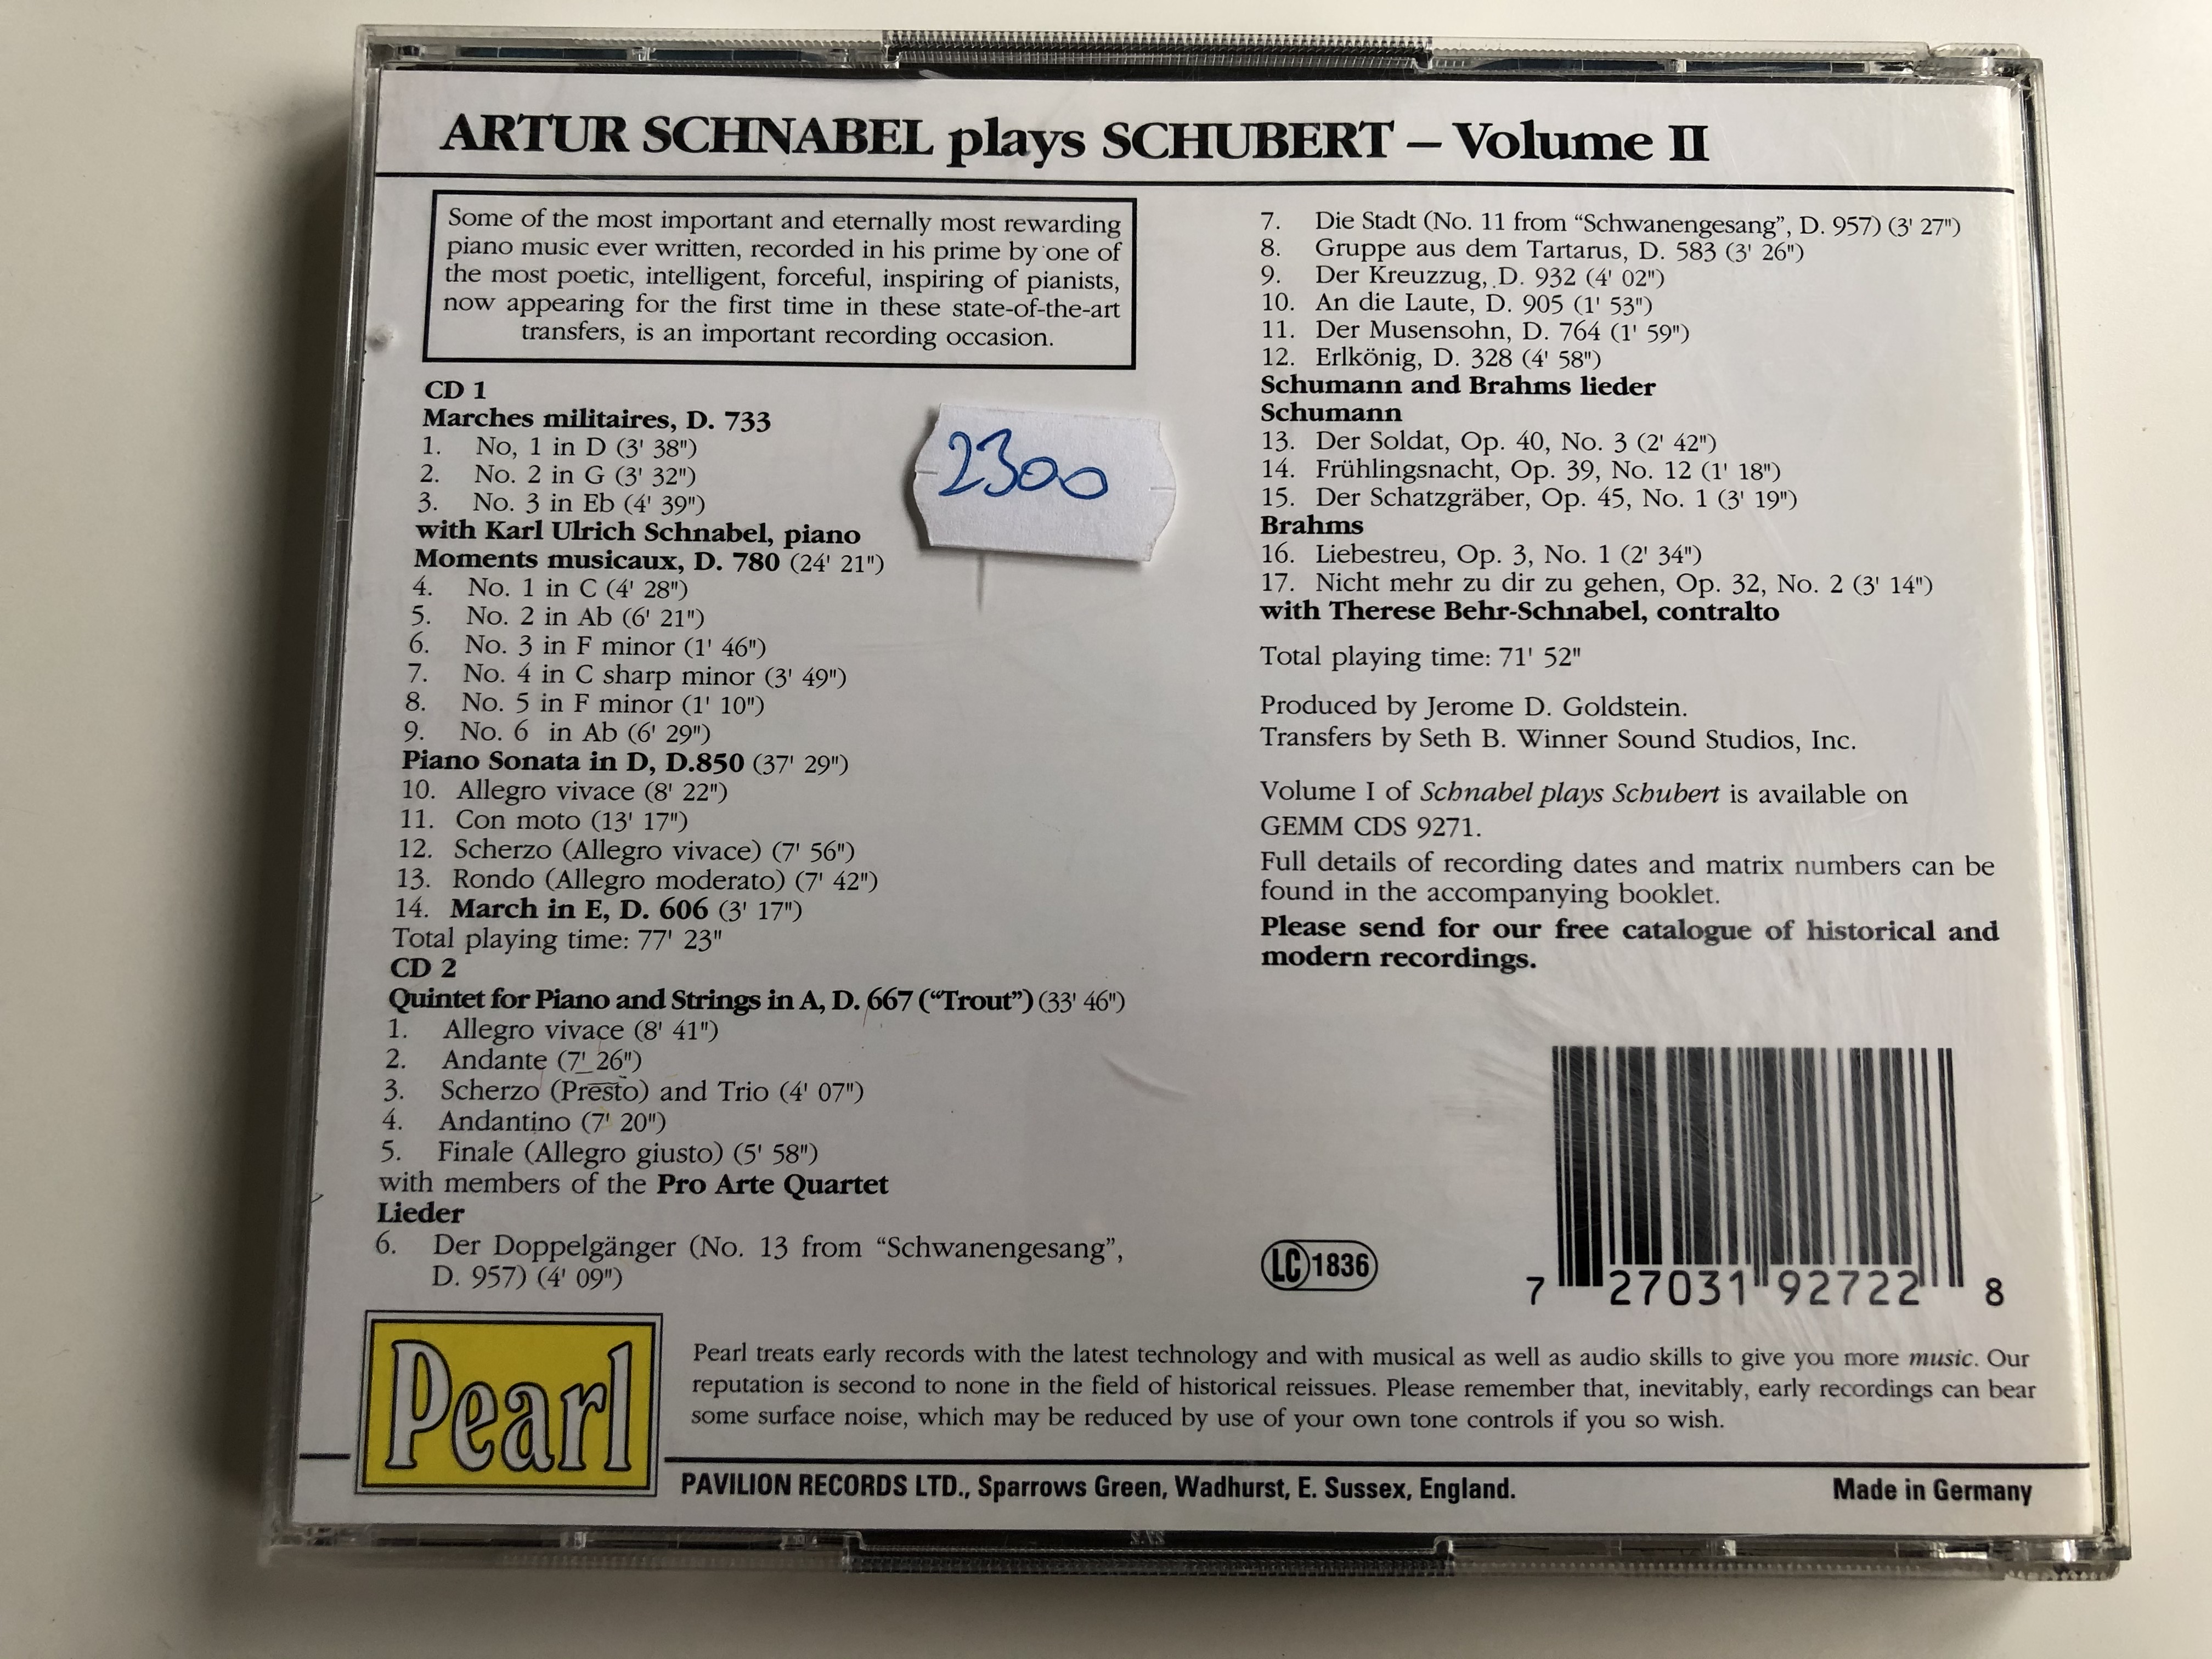 schnabel-plays-schubert-volume-ii-marches-militaires-d.-733-moments-musicaux-d.-780-piano-sonata-in-d-d.-850-march-in-e-d.-606-quintet-for-piano-and-strings-in-a-d.-667-trout-liede-9-.jpg